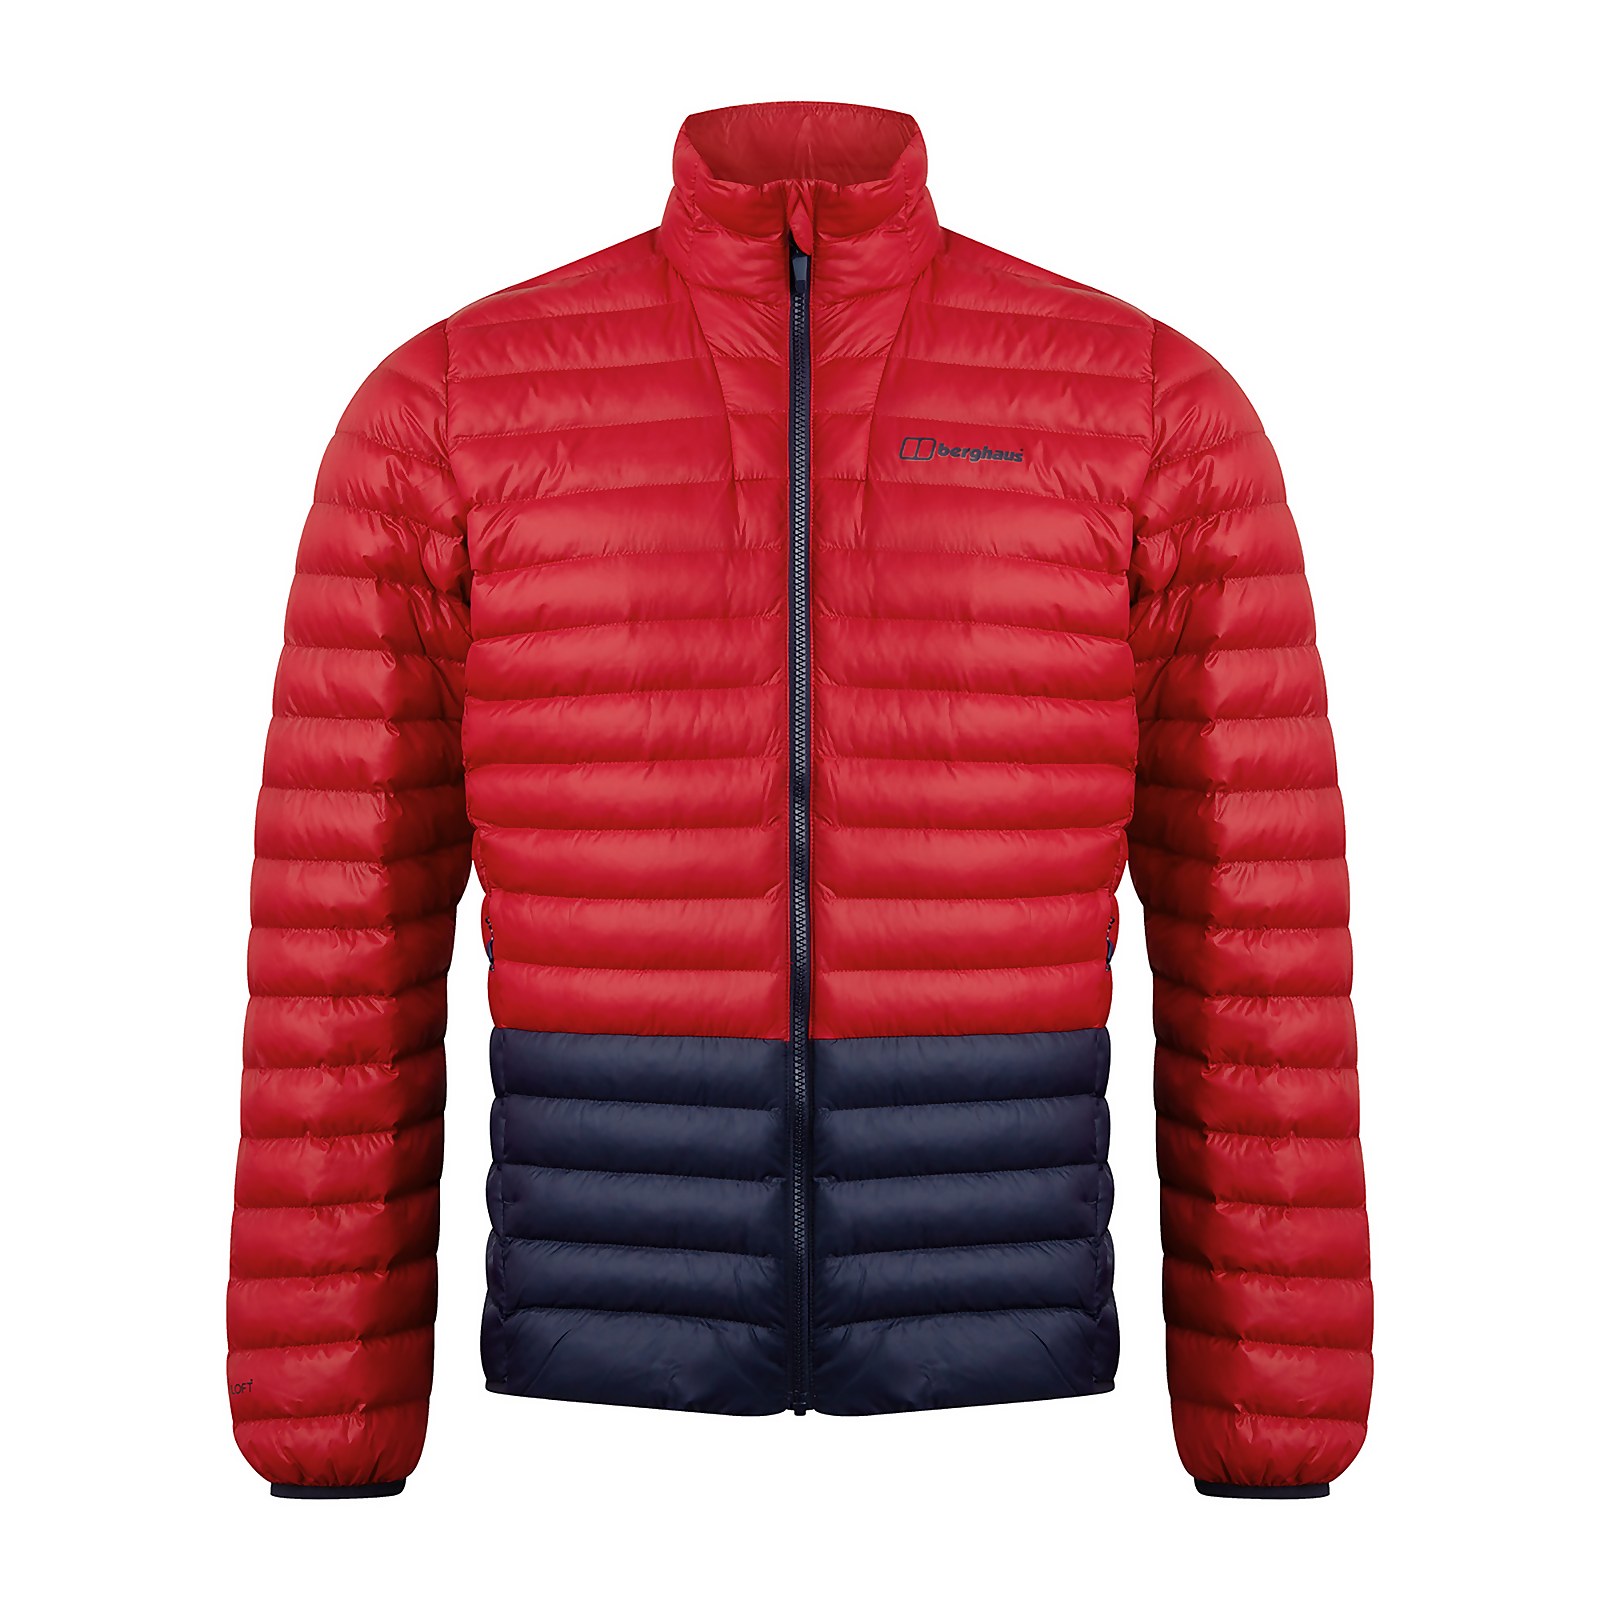 Berghaus Mens Seral Insulated Jacket - Red / Blue - M